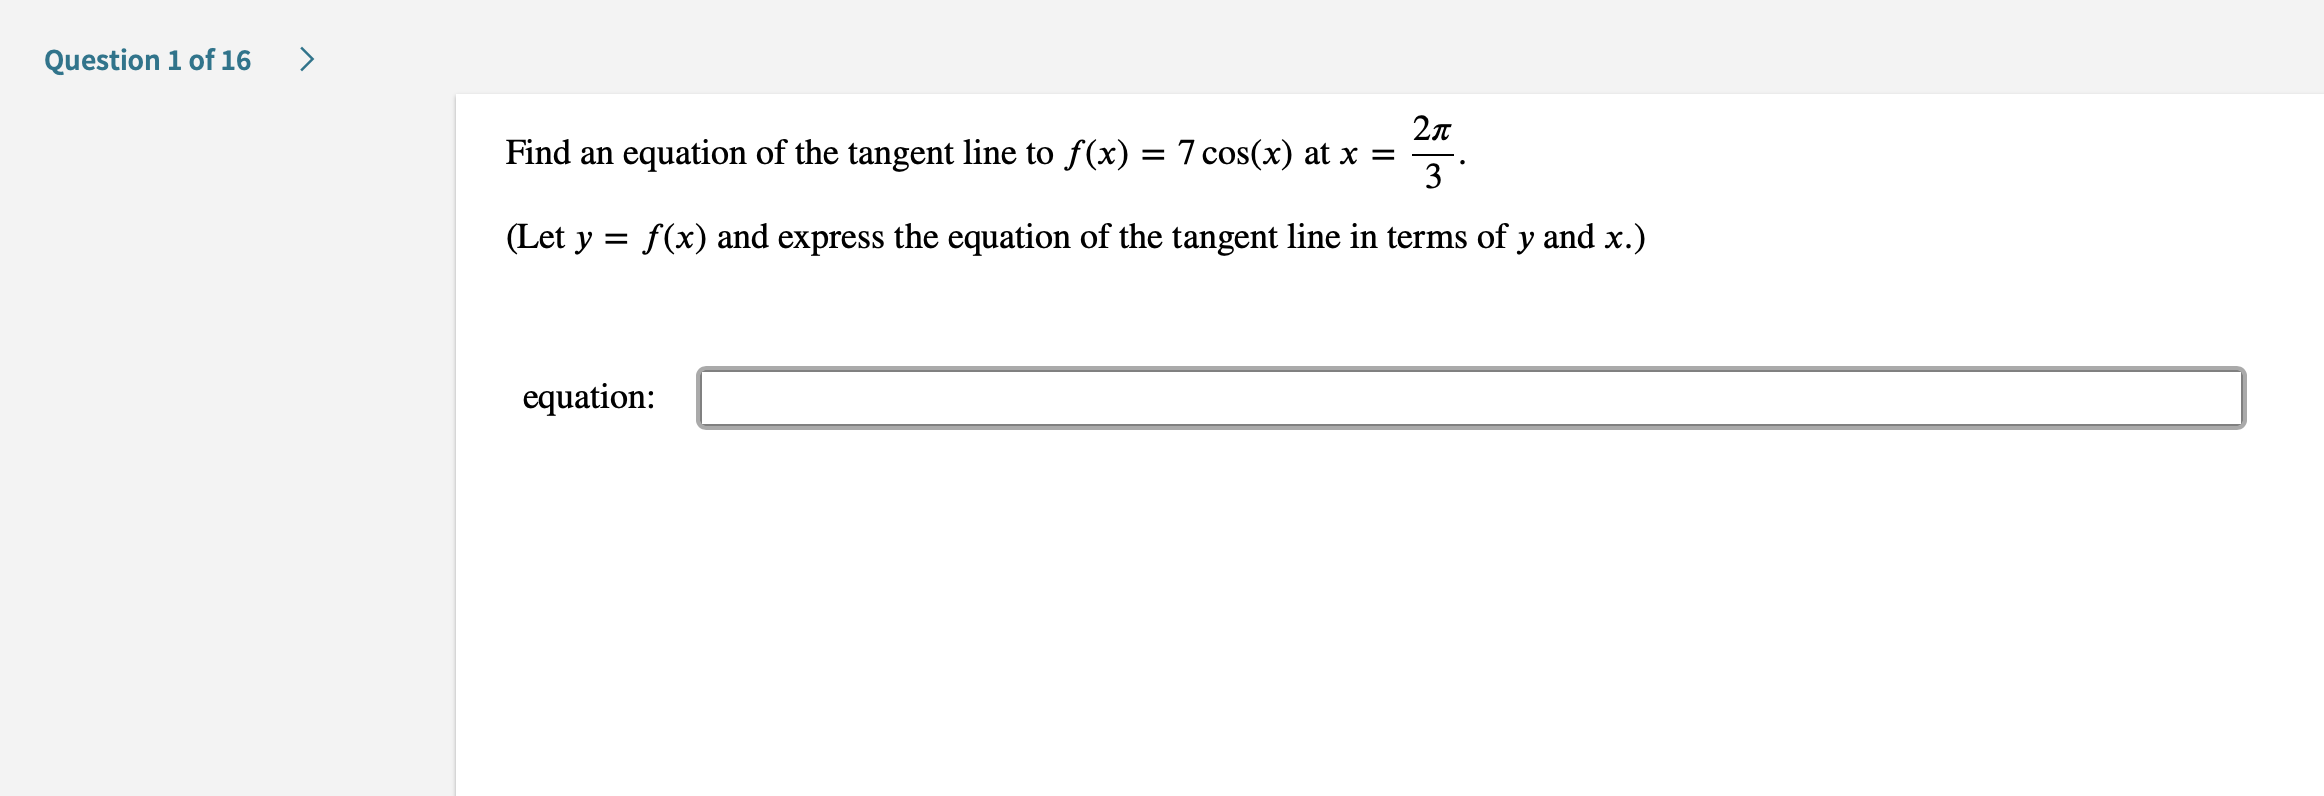 >
Question 1 of 16
27T
Find an
equation of the tangent line to f(x) = 7 cos(x) at x =
3
(Let y f(x) and express the equation of the tangent line in terms of y and x.)
equation
